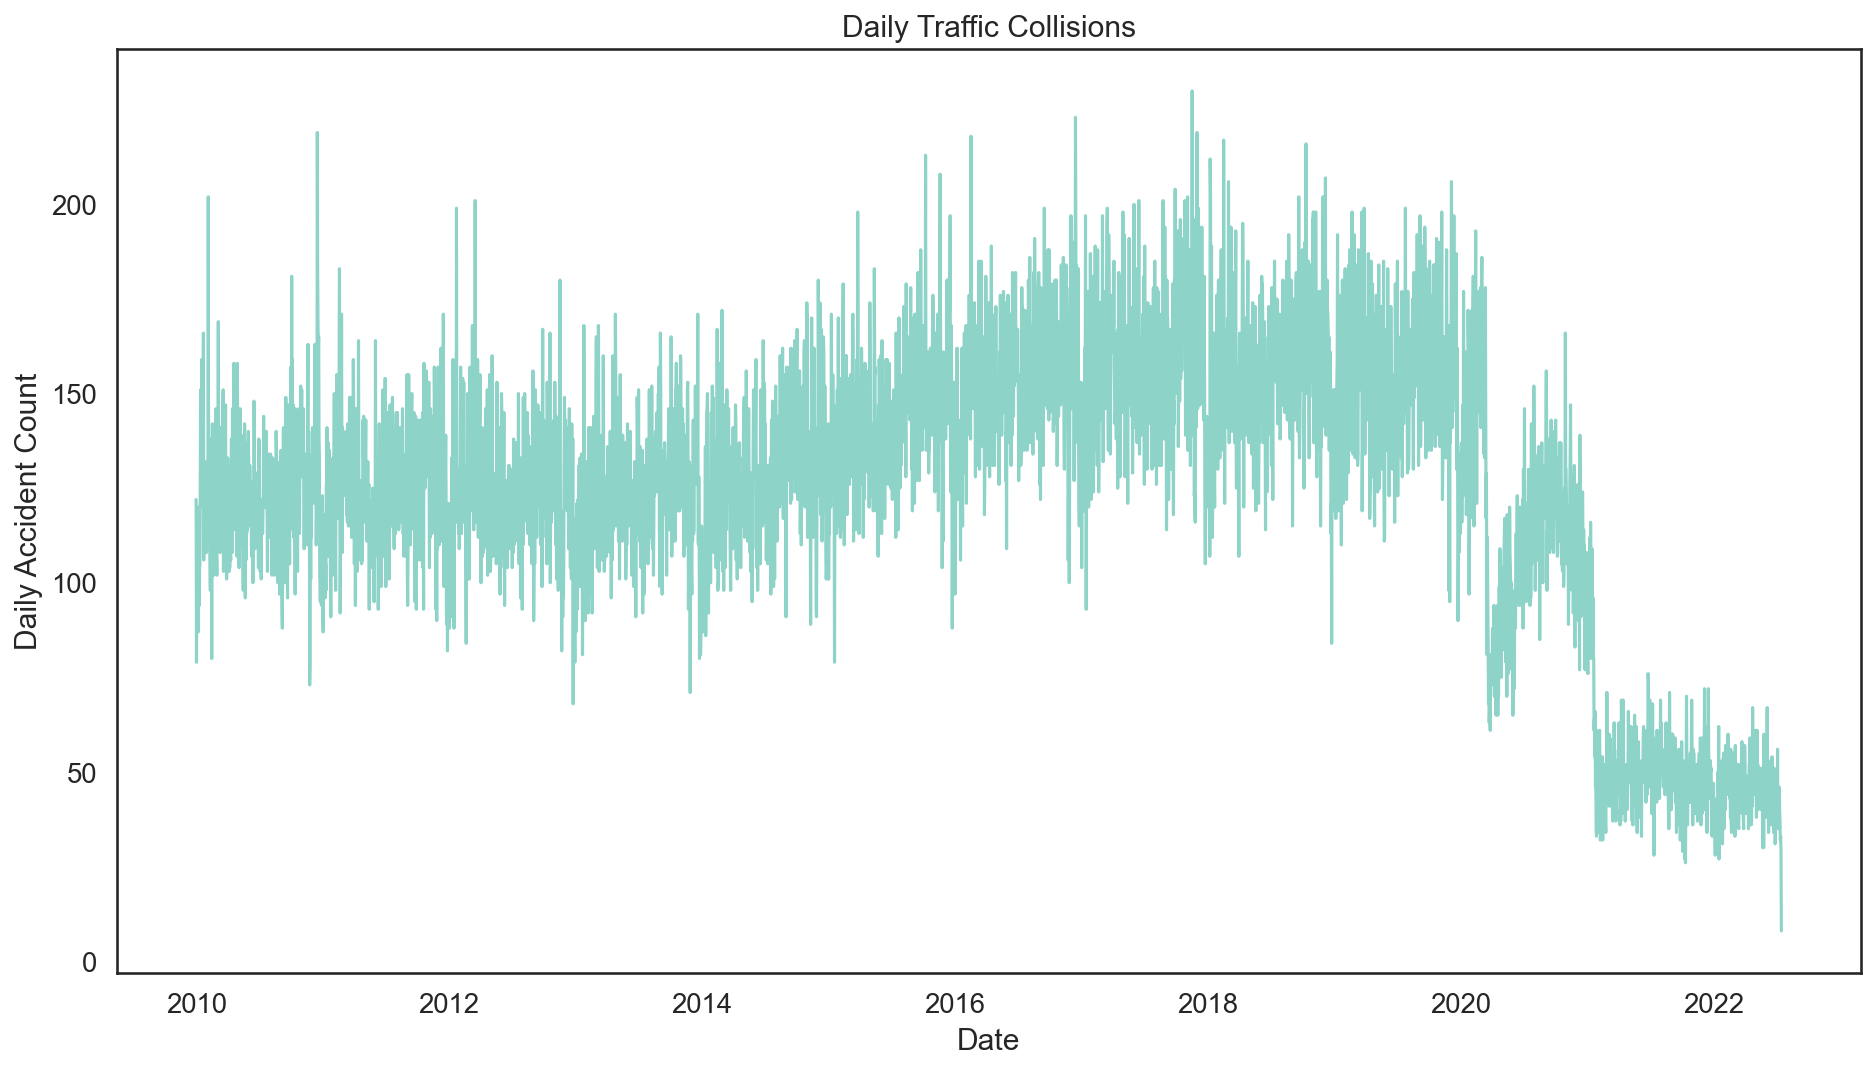 Daily Traffic Collisions